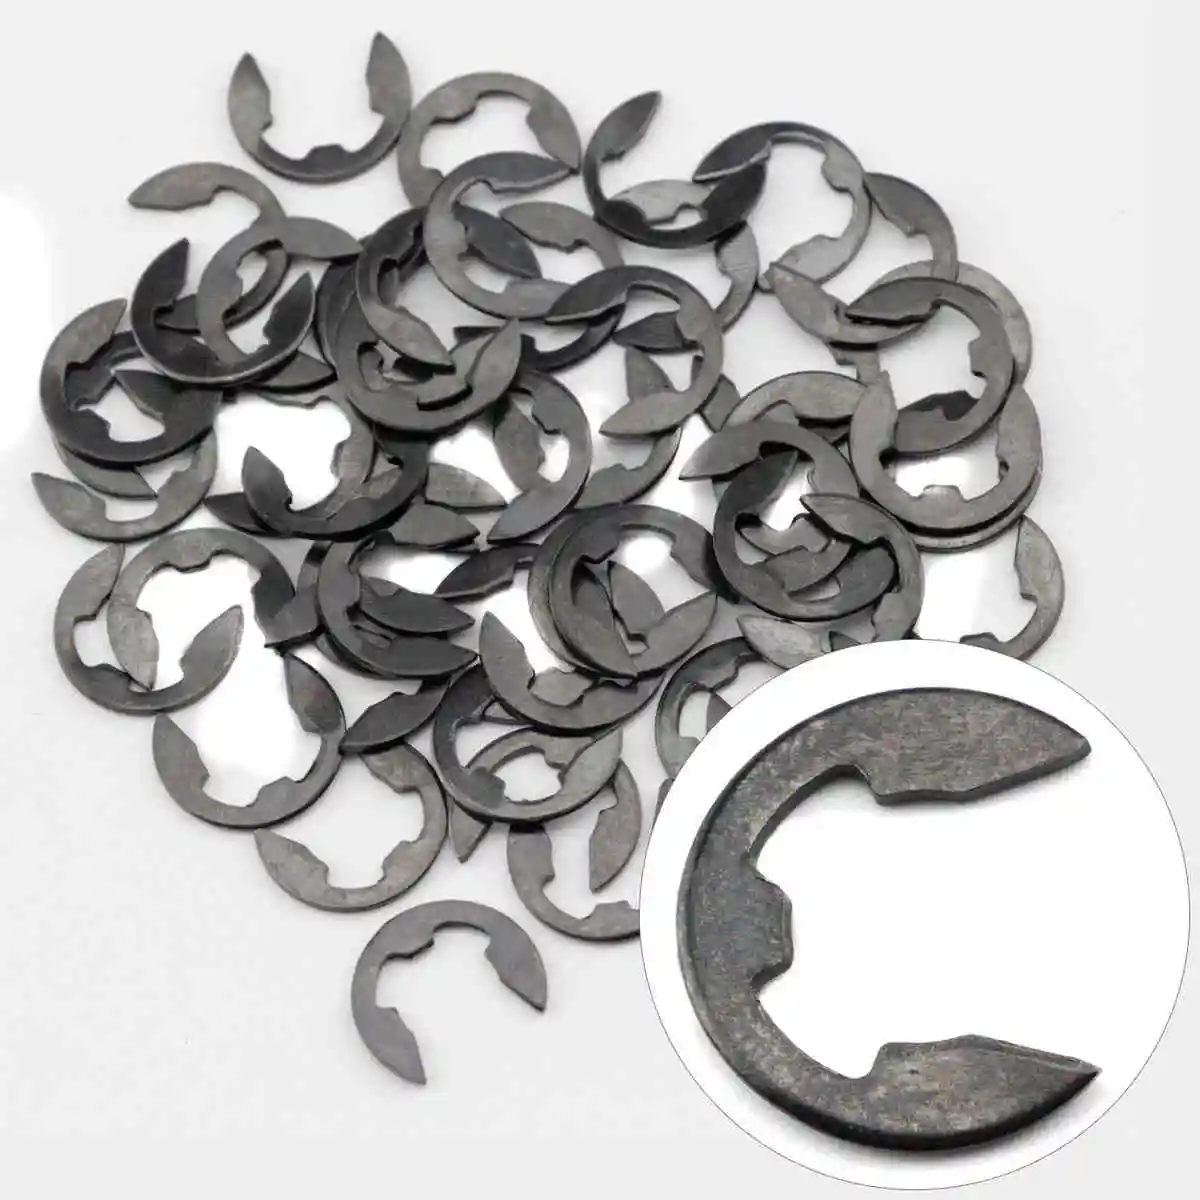 50pcs x E-clip Snap Ring for MS170 MS180 MS250 MS260 MS361 MS440 MS460 MS660 8mm  Accessories